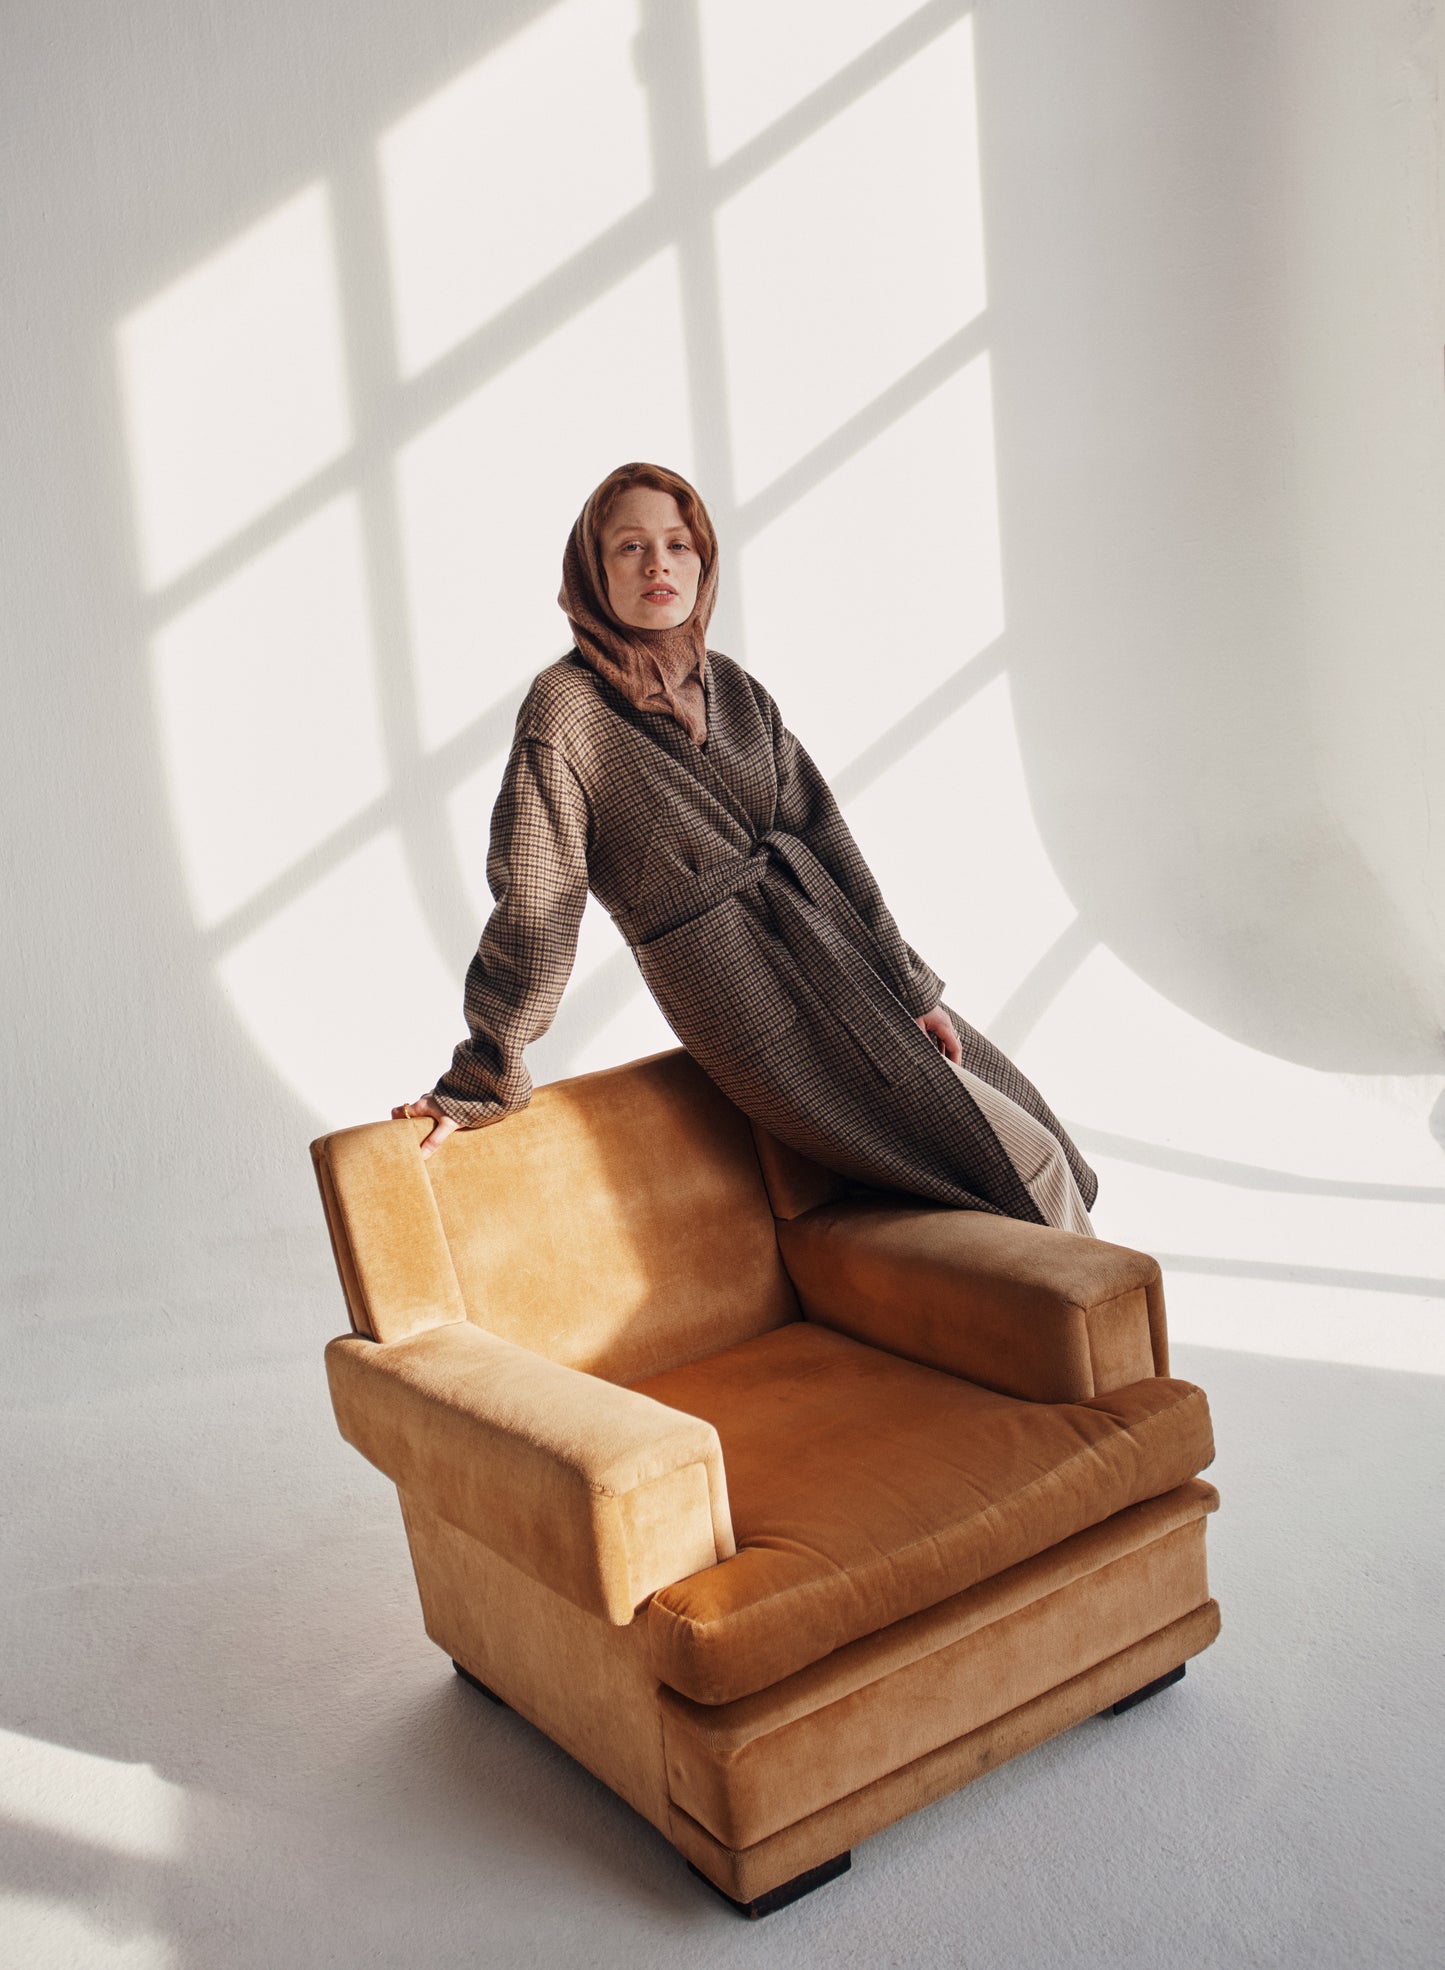 A celebrated addition to any winter wardrobe, the Marta Coat is the perfect blend of sophistication and practicality. Crafted from a herringbone wool for a timeless style and tailored silhouette, and complete with an adjustable tie waist for a flattering fit.